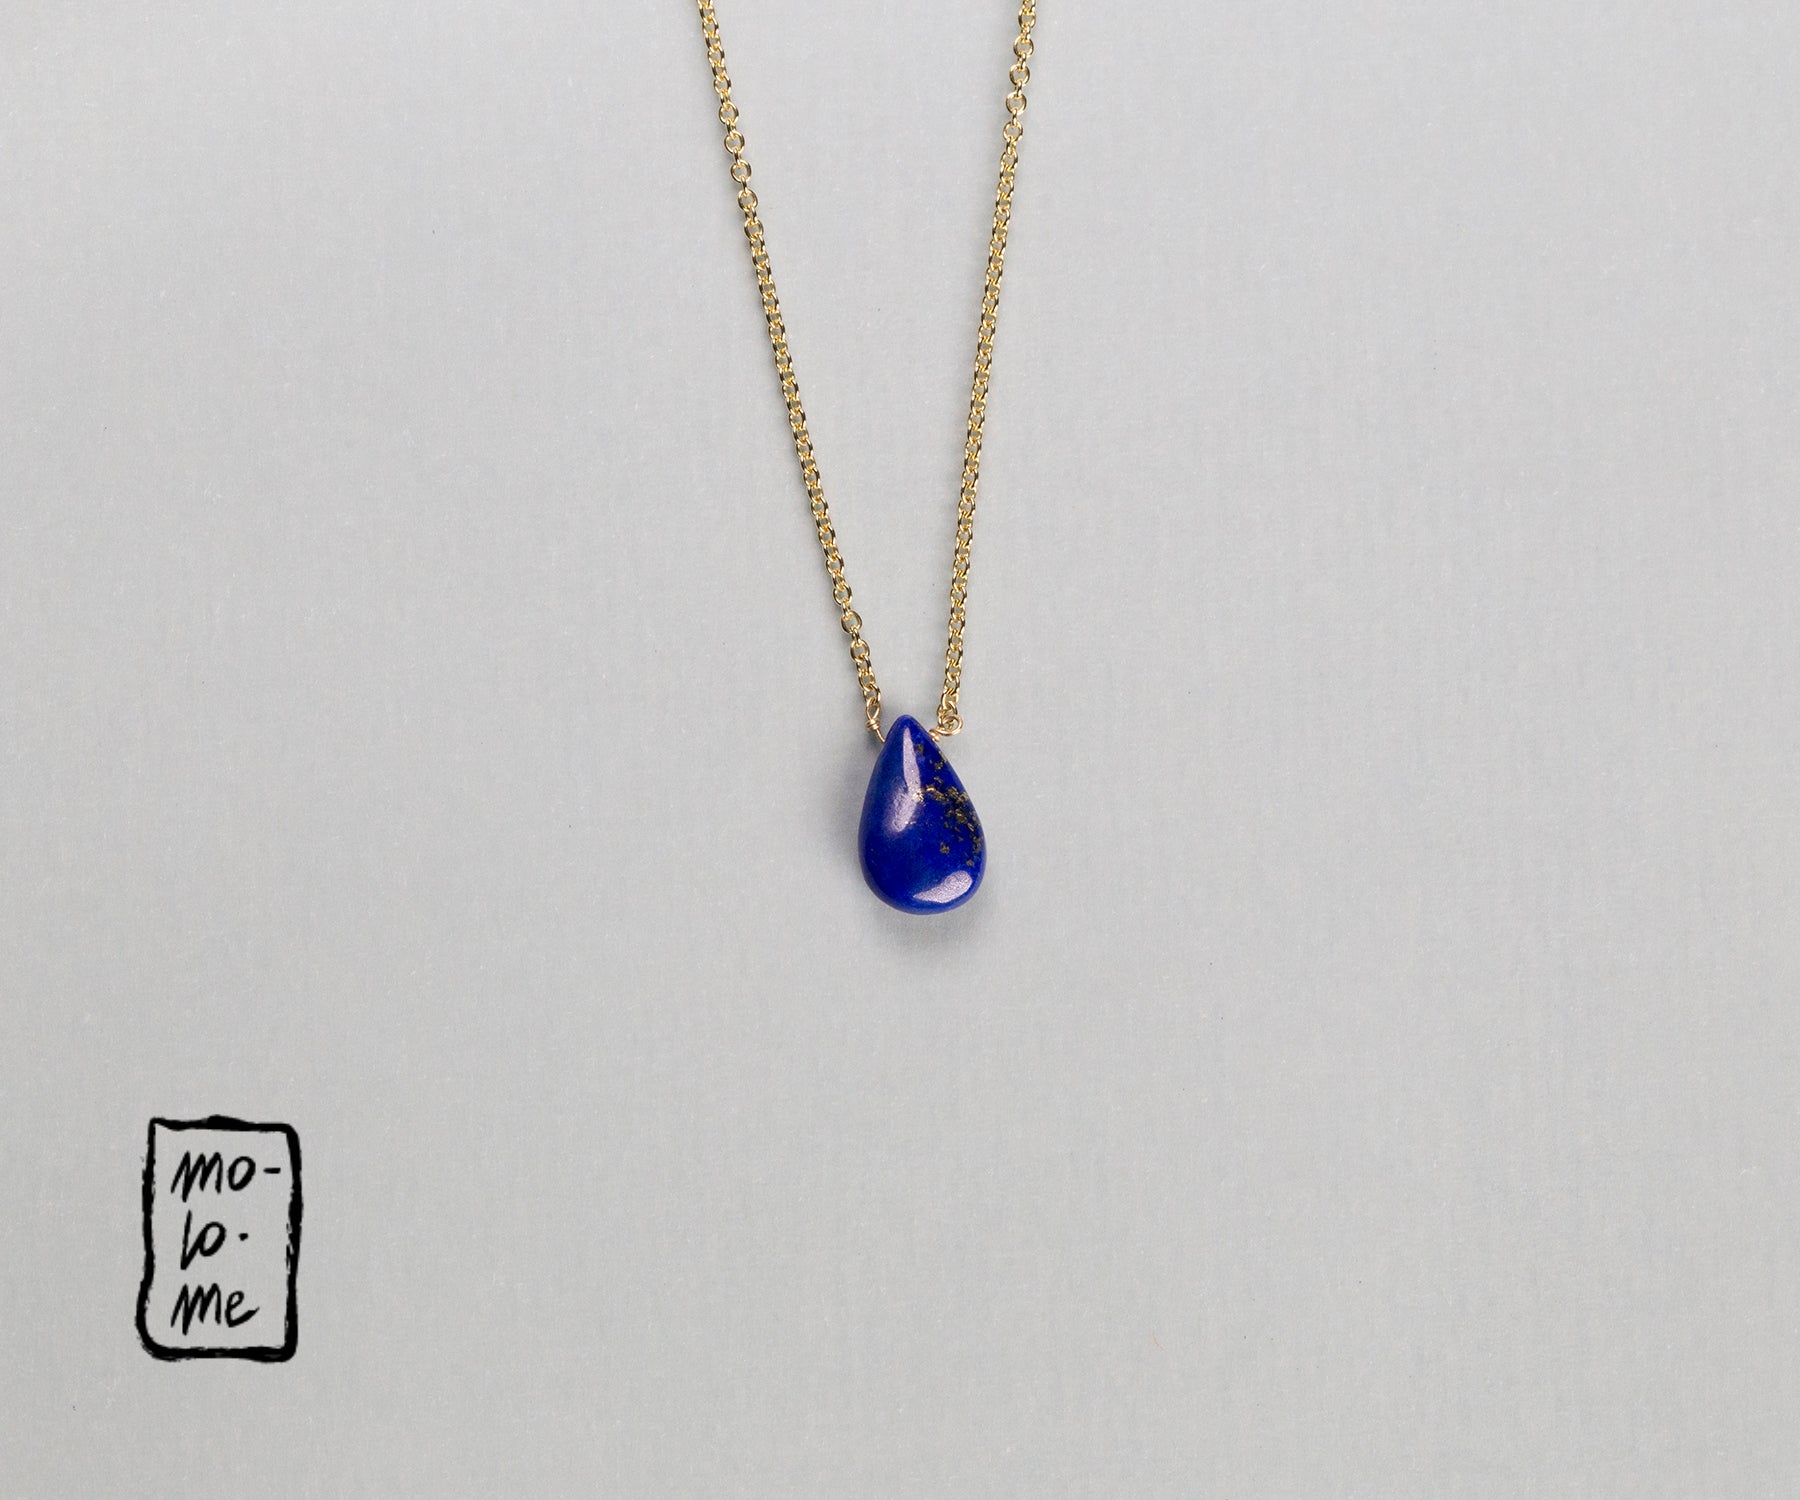 Lala Lapis Lazuli Necklace on 9 carat Gold Chain by Molo Me